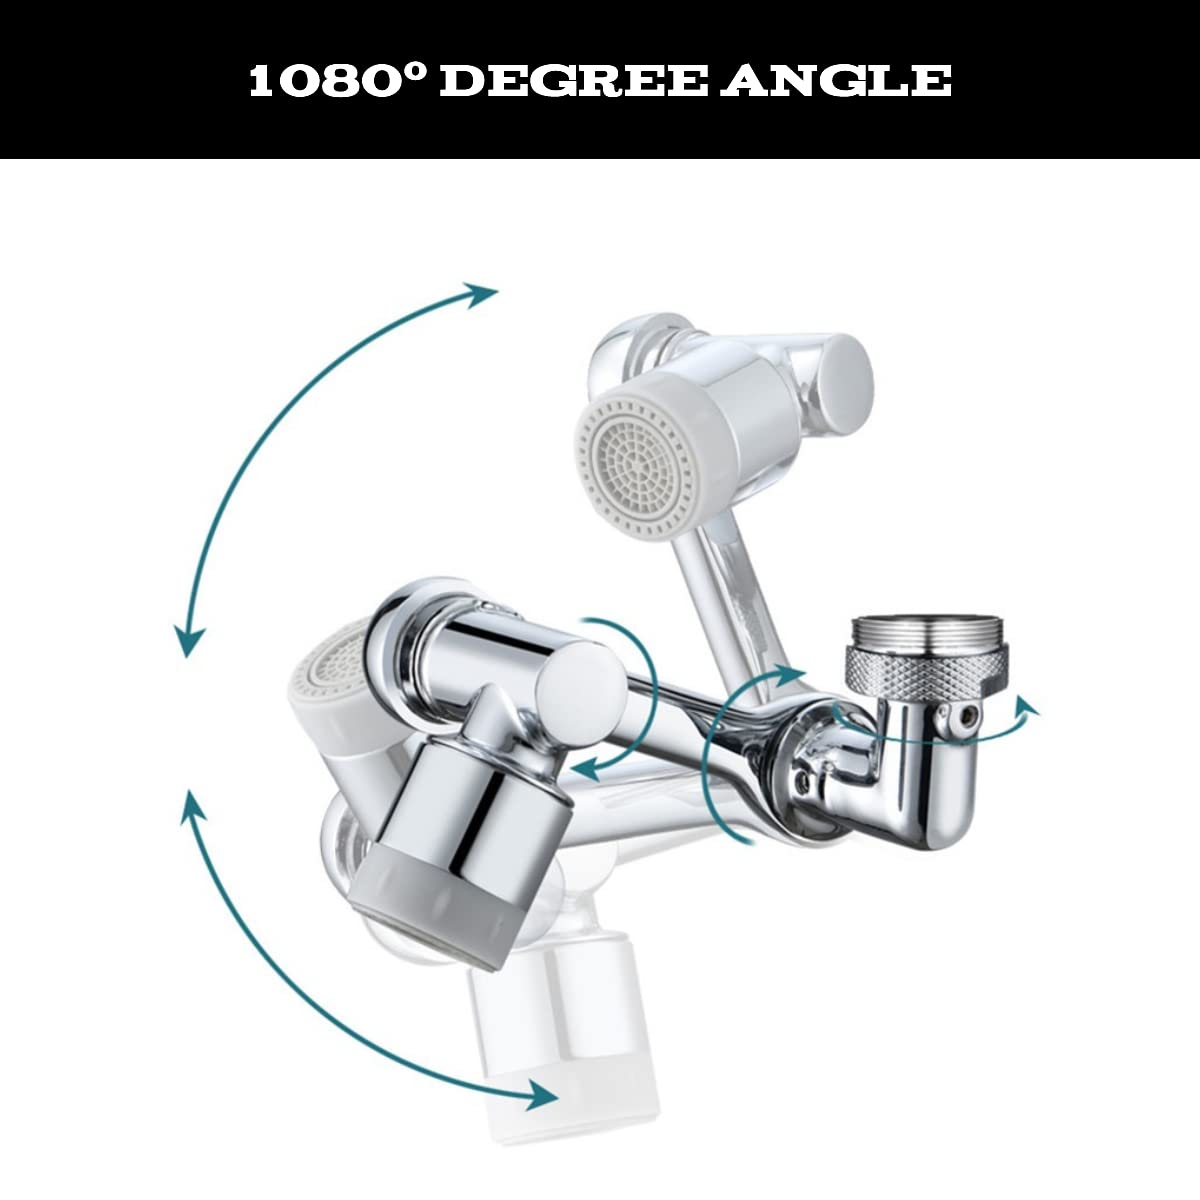 TENXDEKA Rotatable Faucet Extender - Swivel Faucet Aerator - Universal Connection - 1080 Faucet Attachment - Dual Function 2 Flow from Stream to Spray Head - Triple Thread Connector - Easy to Install